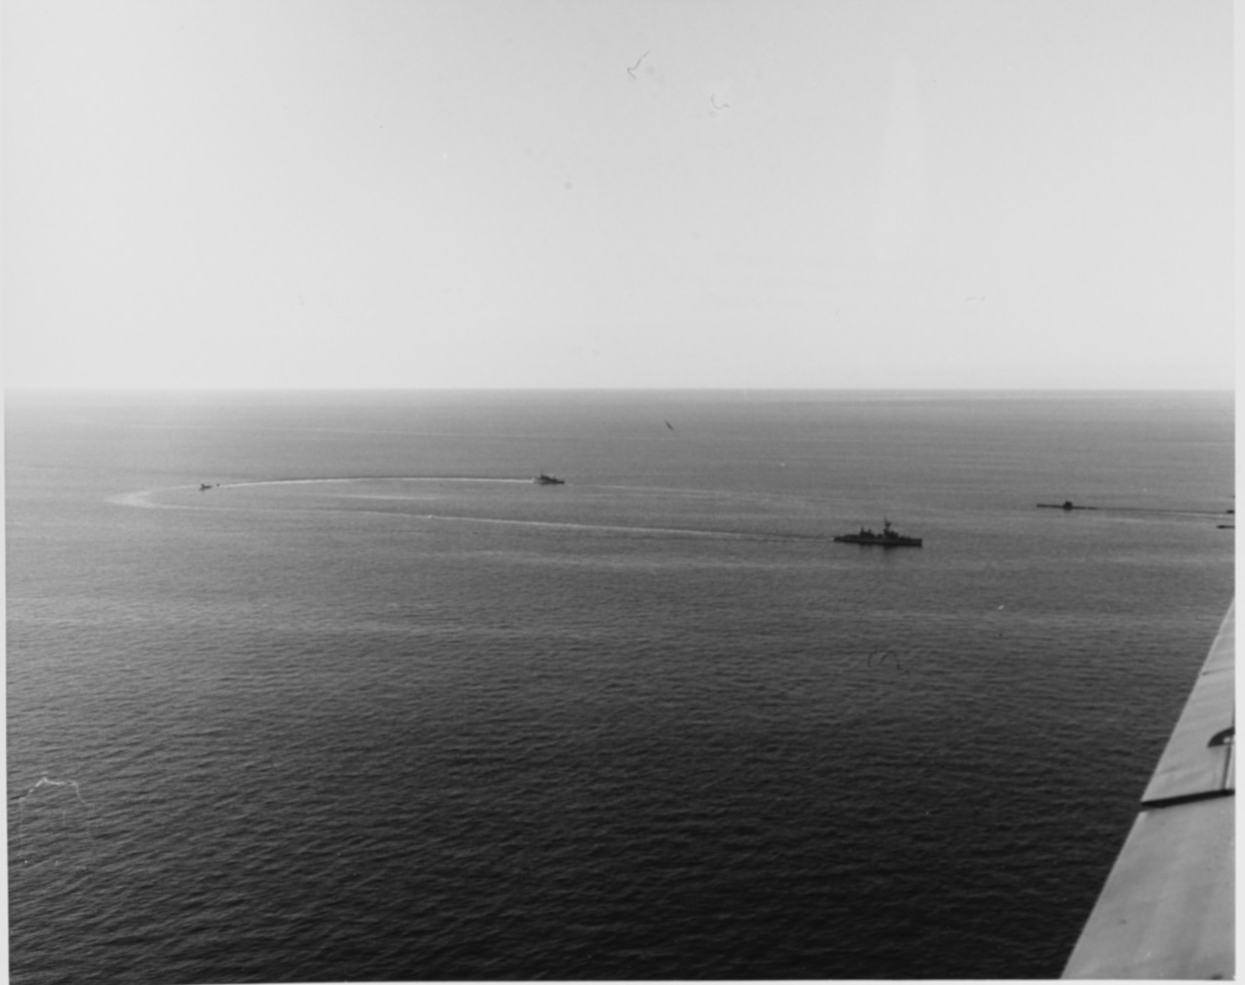 Photo #: NH 97555 Loss of USS Thresher (SSN-593), April 1963